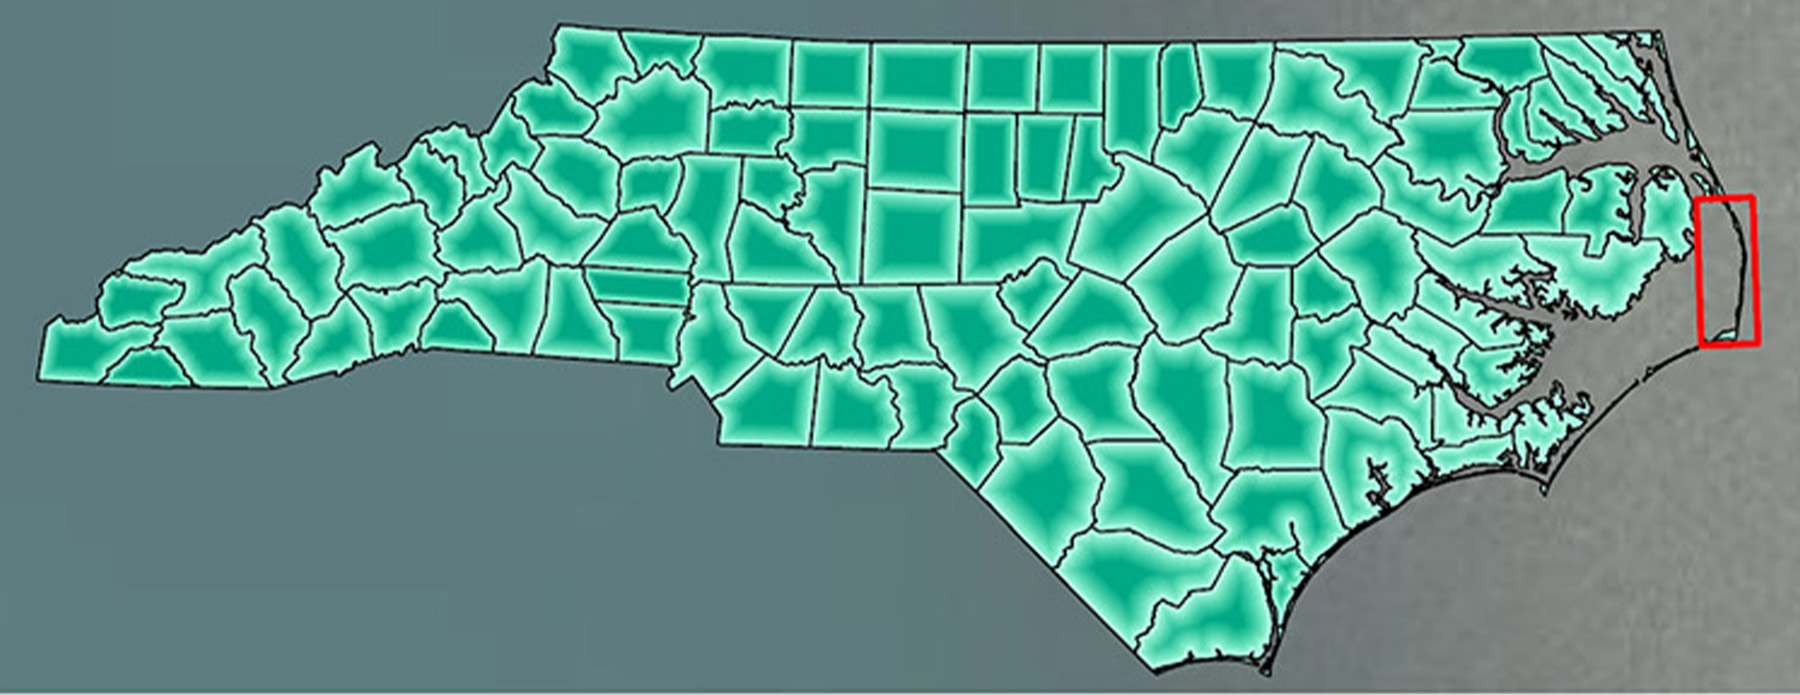 A map of North Carolina showing all the counties as well as the location of a new bridge. 